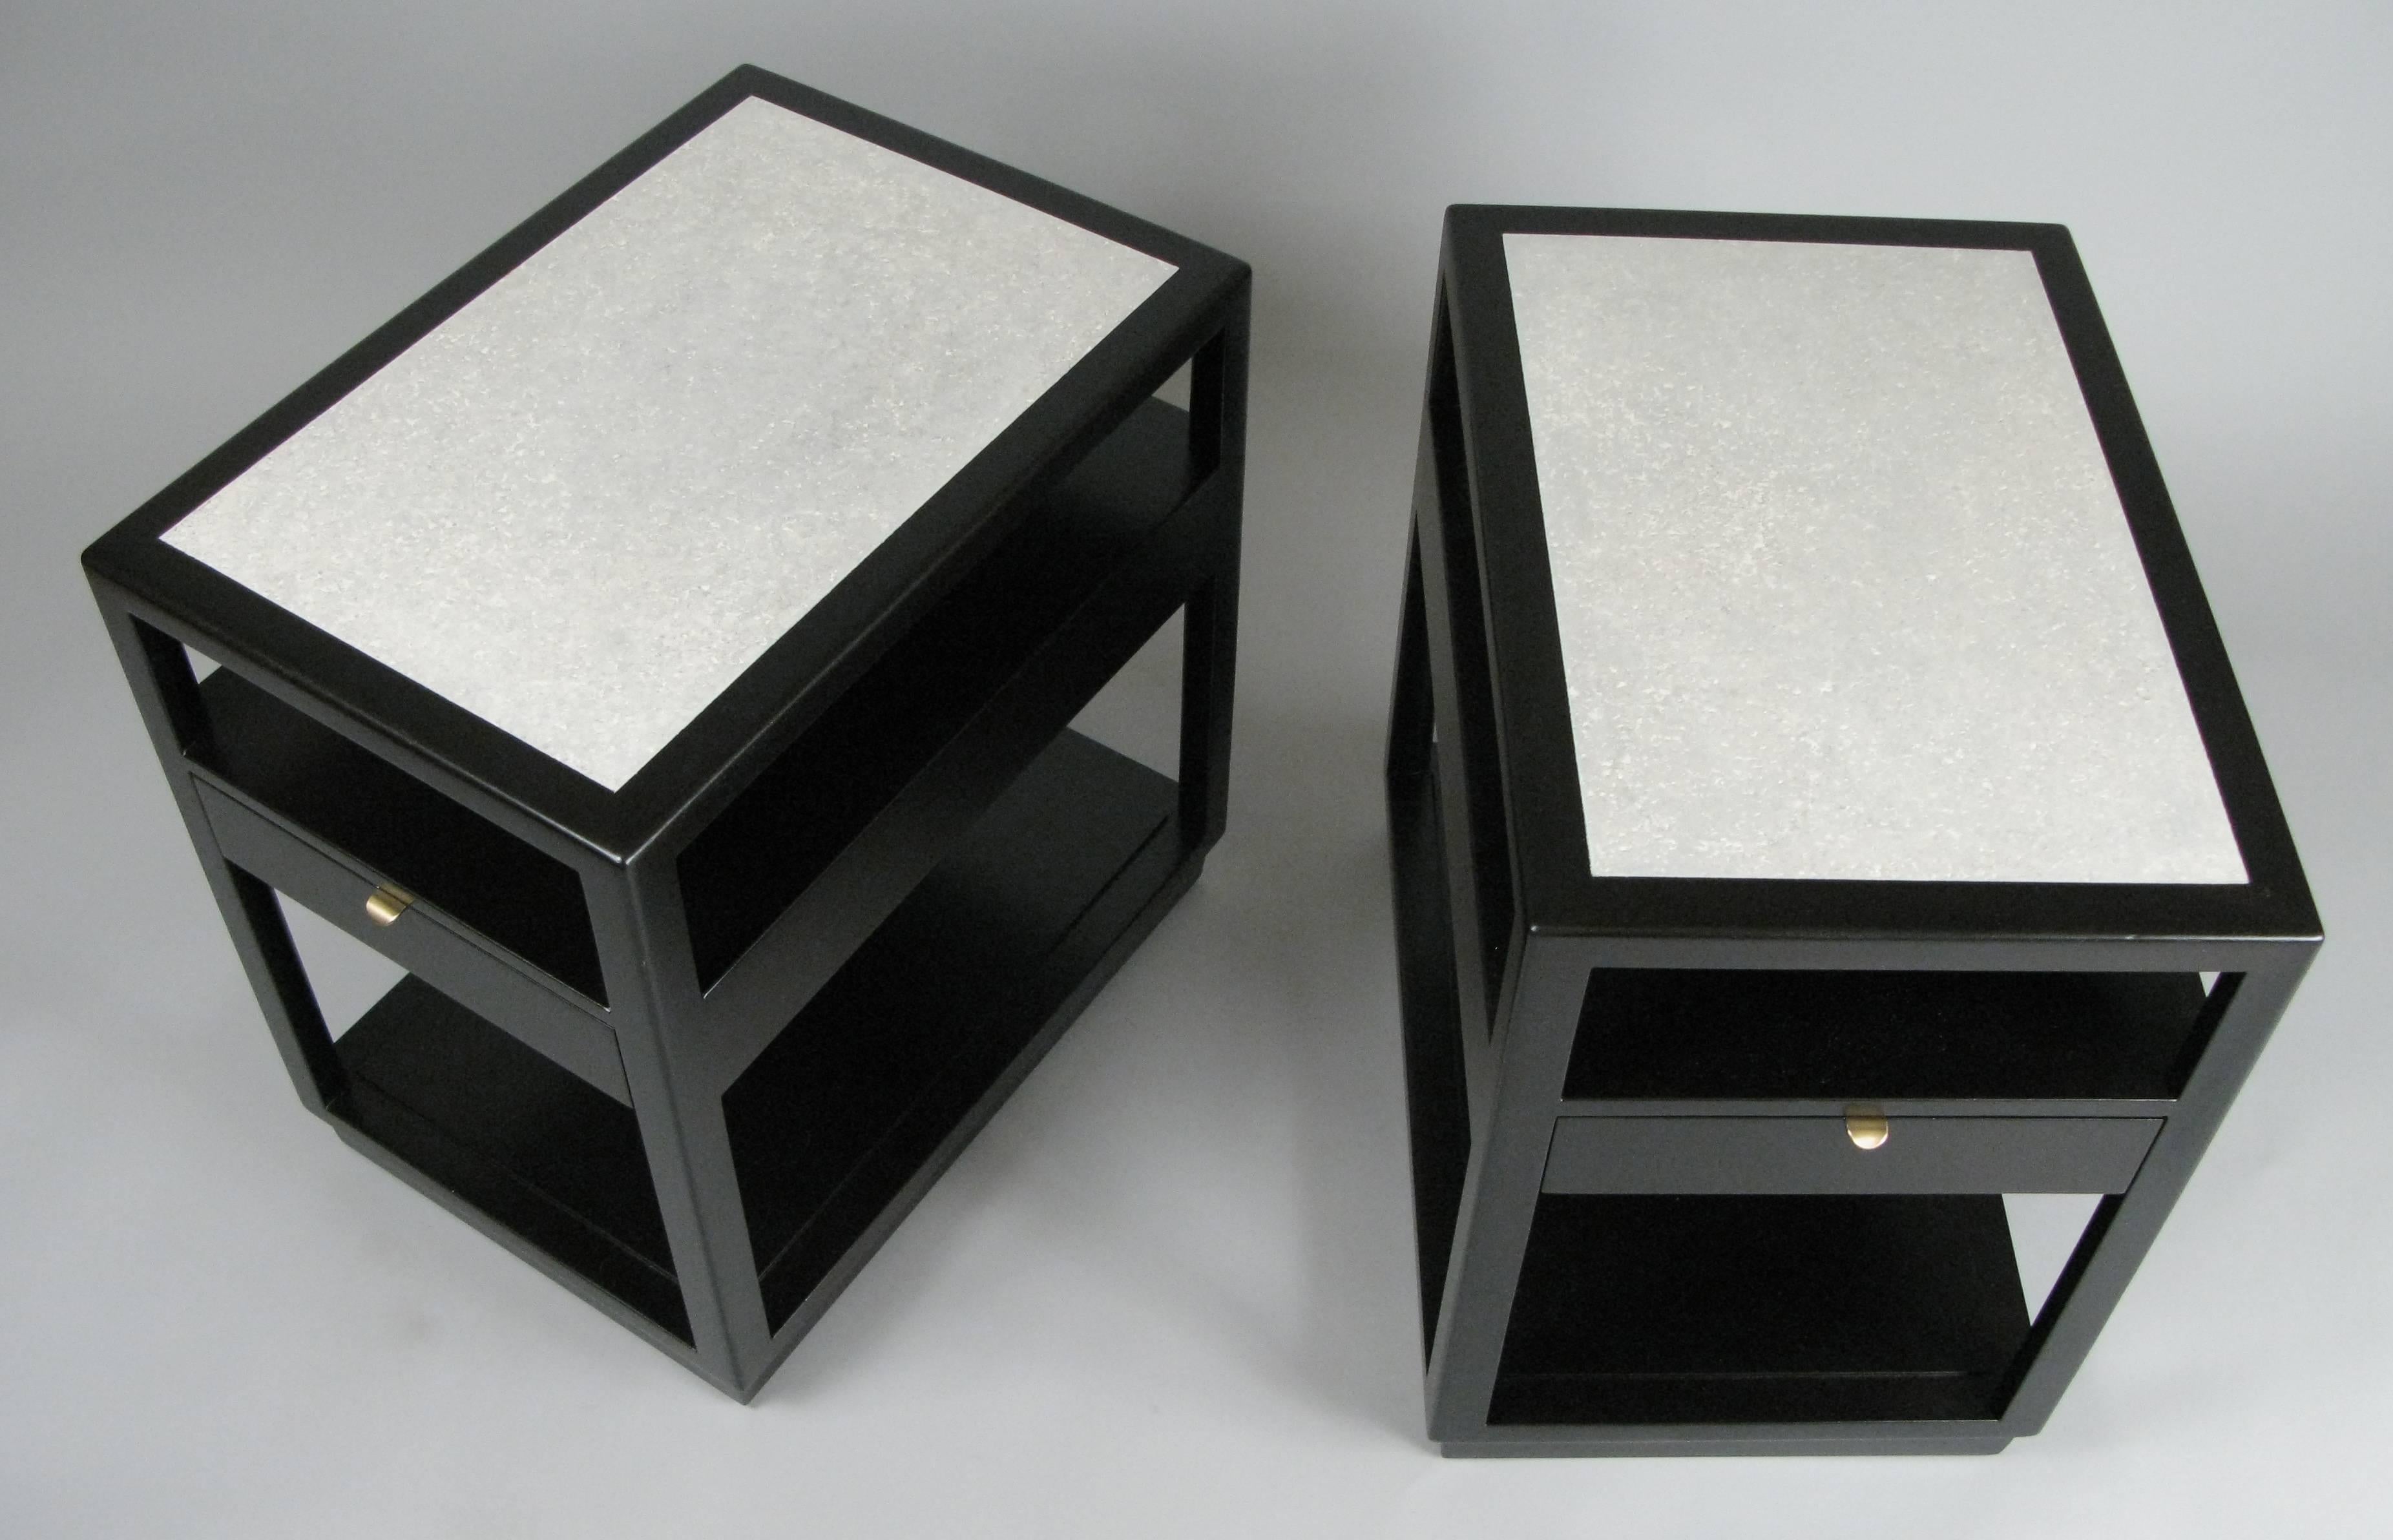 American Pair of Ebonized Mahogany and Cork Nightstands by Edward Wormley for Dunbar